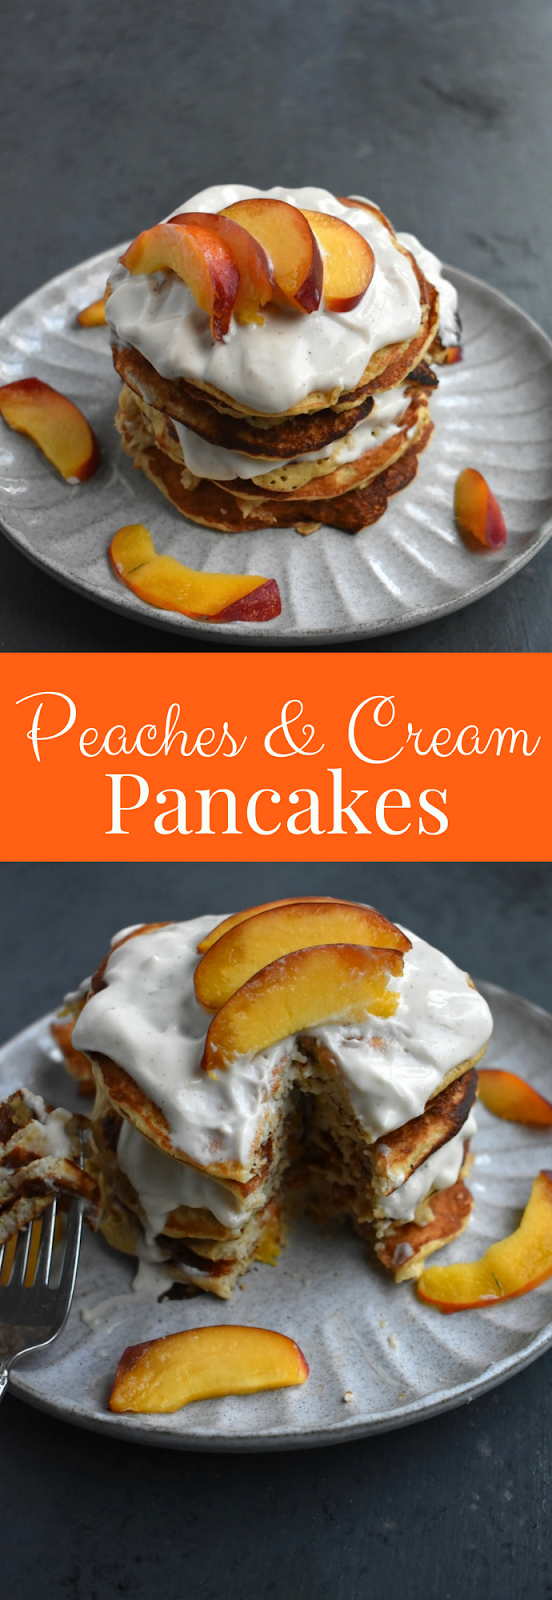 Whole-Grain Peaches and Cream Pancakes are dairy-free, whole-grain, gluten-free and full of delicious juicy peaches and cream. They make the perfect breakfast and a great for meal prep! www.nutritionistreviews.com